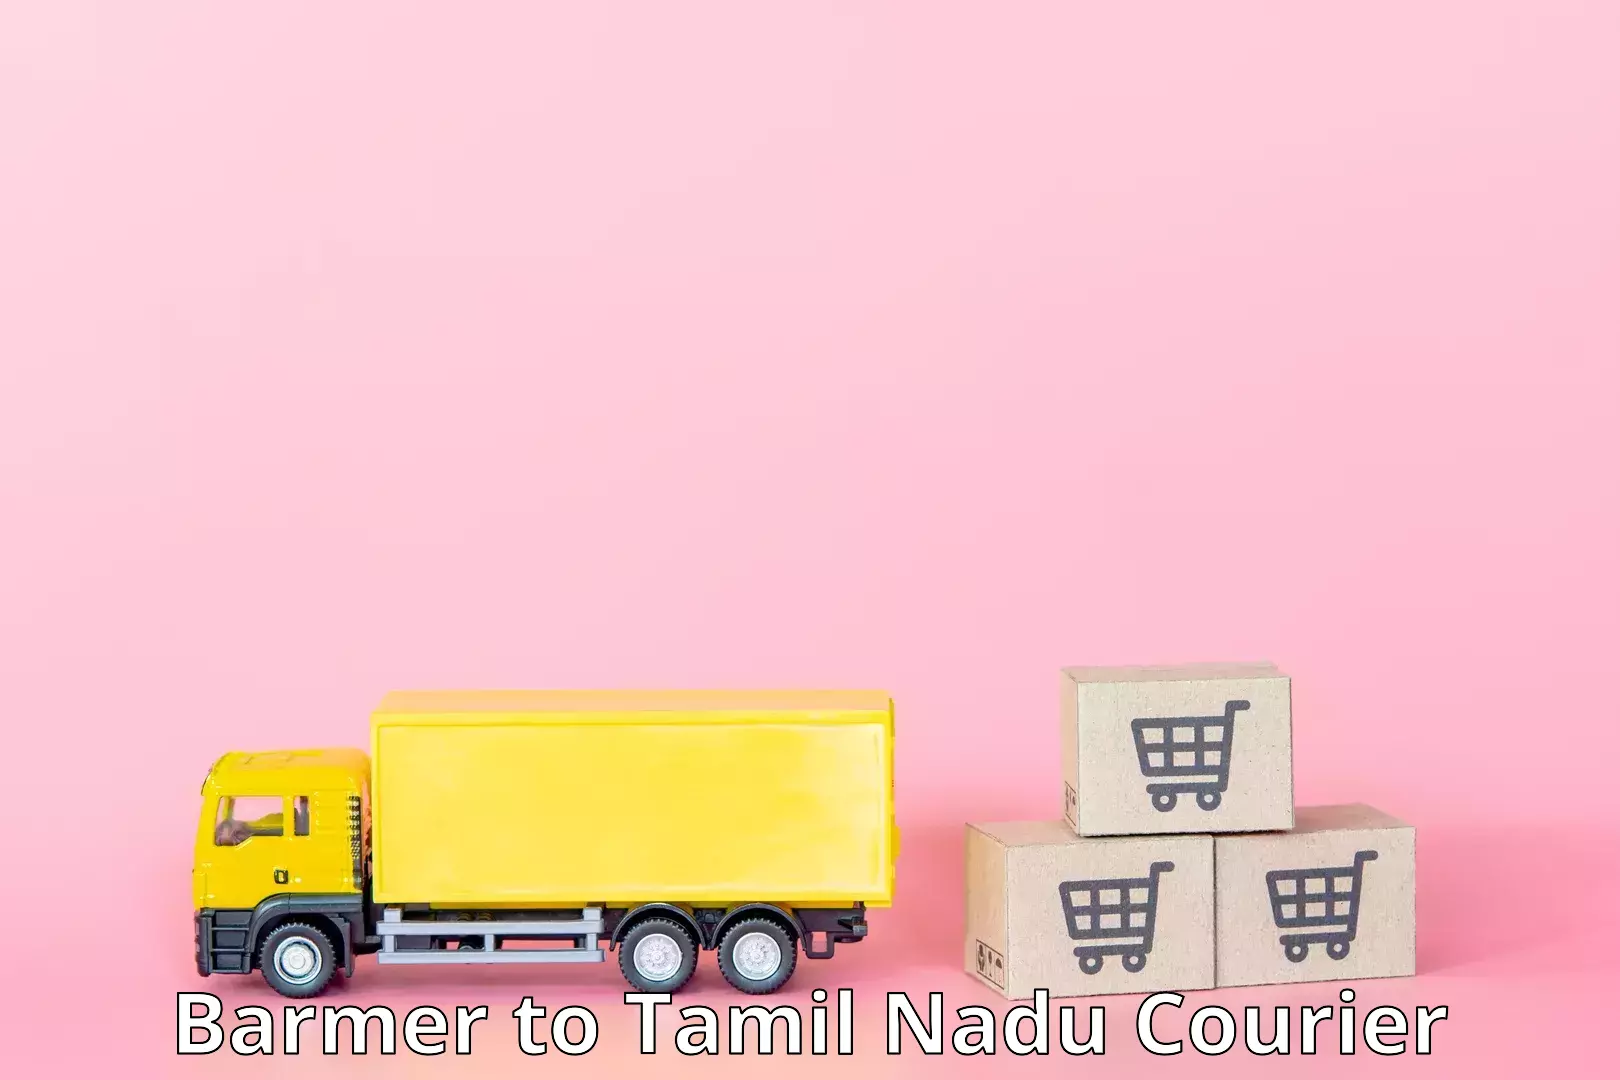 Round-the-clock parcel delivery Barmer to Sriperumbudur